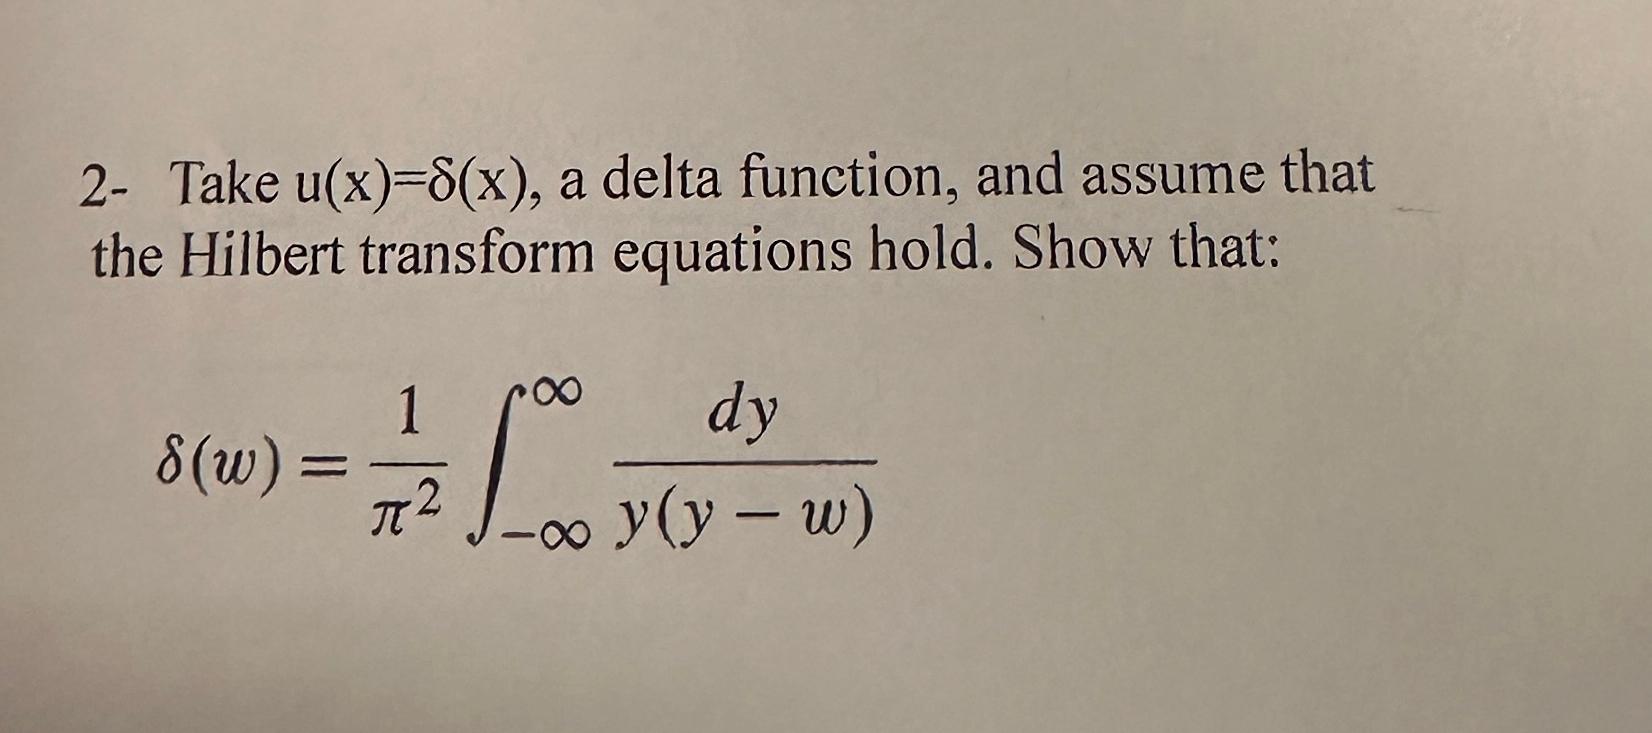 2- Take u(x)=8(x), a delta function, and assume that the Hilbert transform equations hold. Show that: 8(w) =